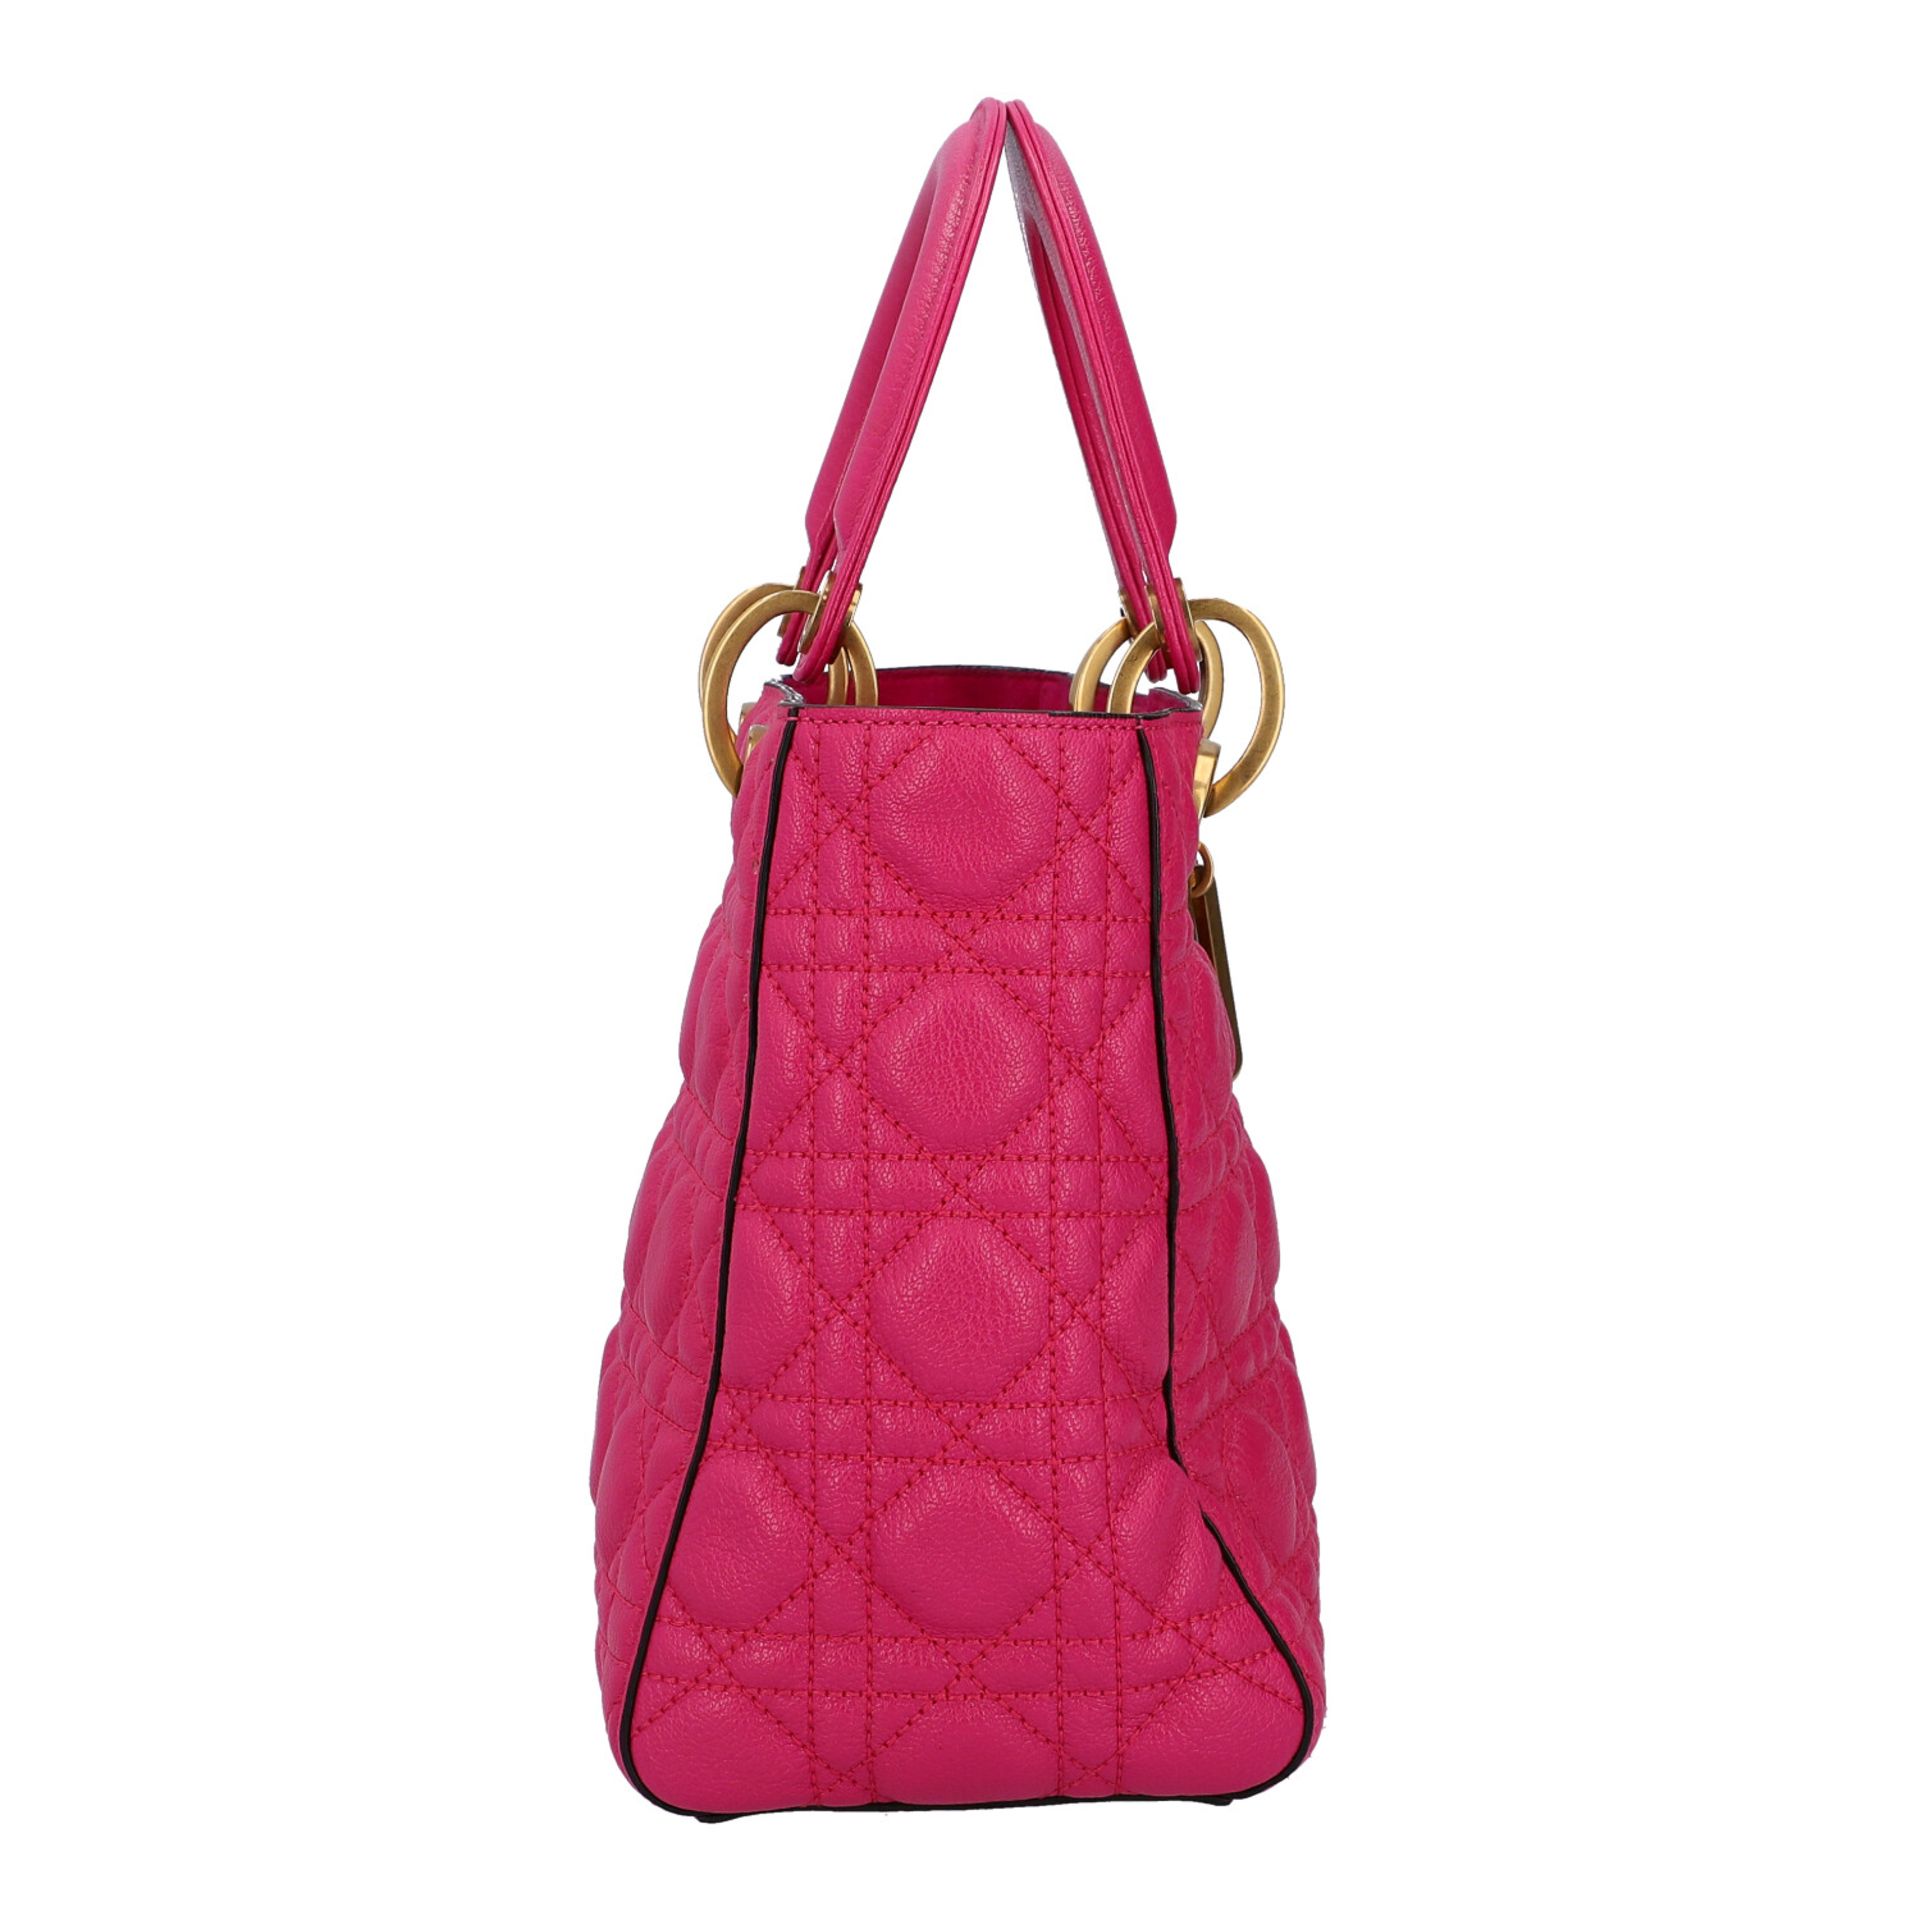 CHRISTIAN DIOR Handtasche "LADY DIOR", Koll. 2018.Limited Edition in Fuchsia. NP. ca.: - Image 3 of 8